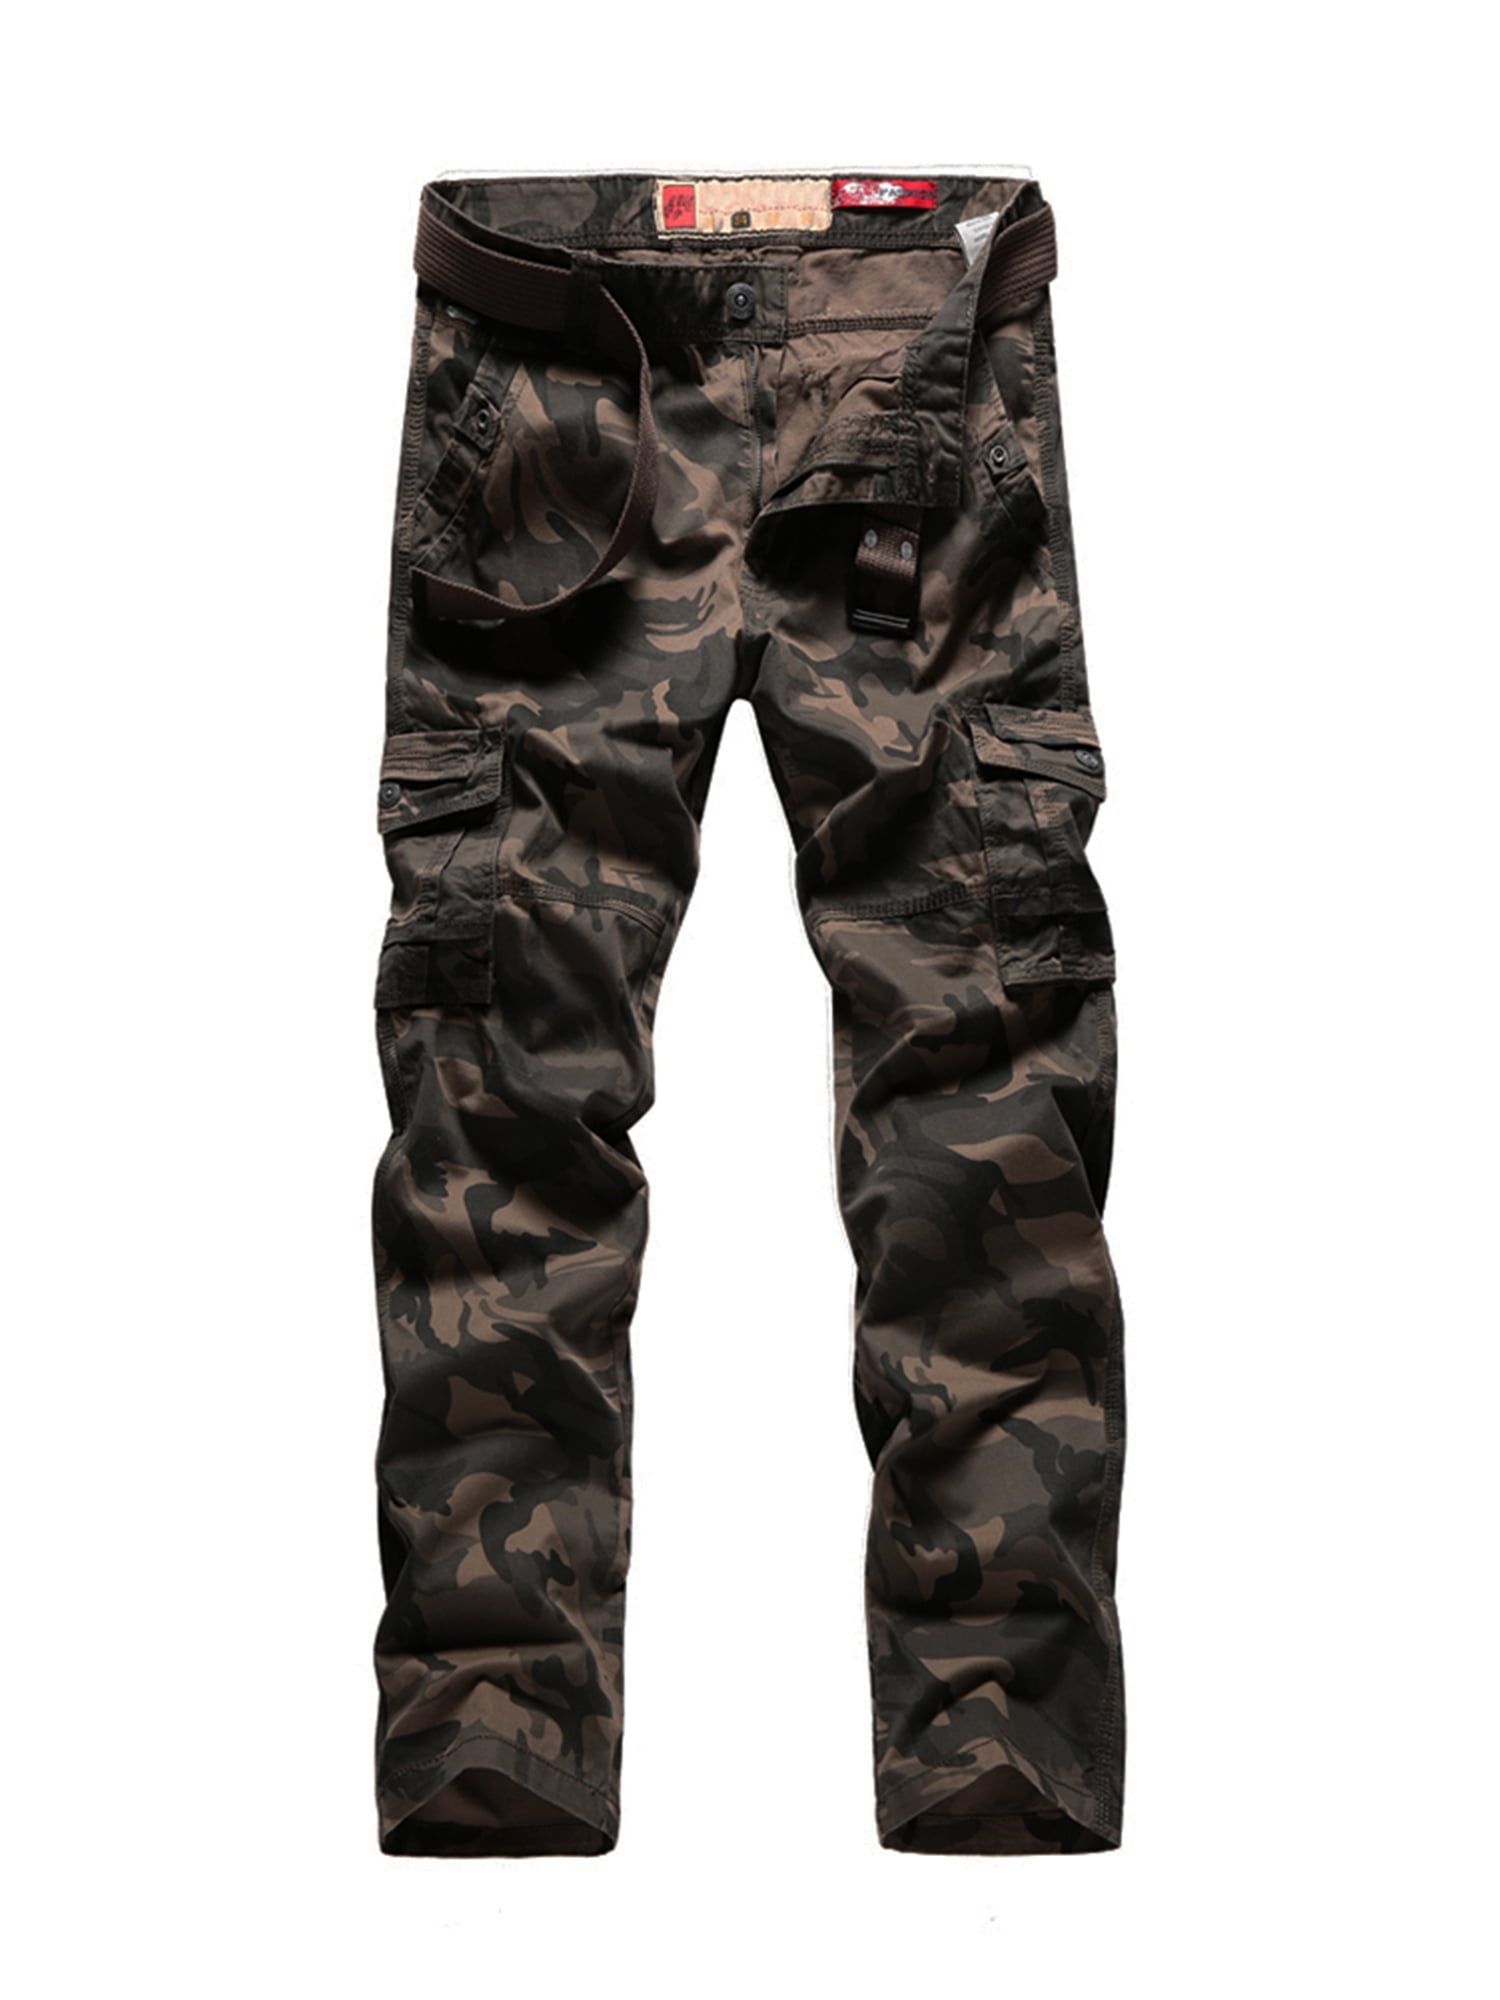 Keybur Mens Cotton Casual Military Army Cargo Camo Combat Work Pants 